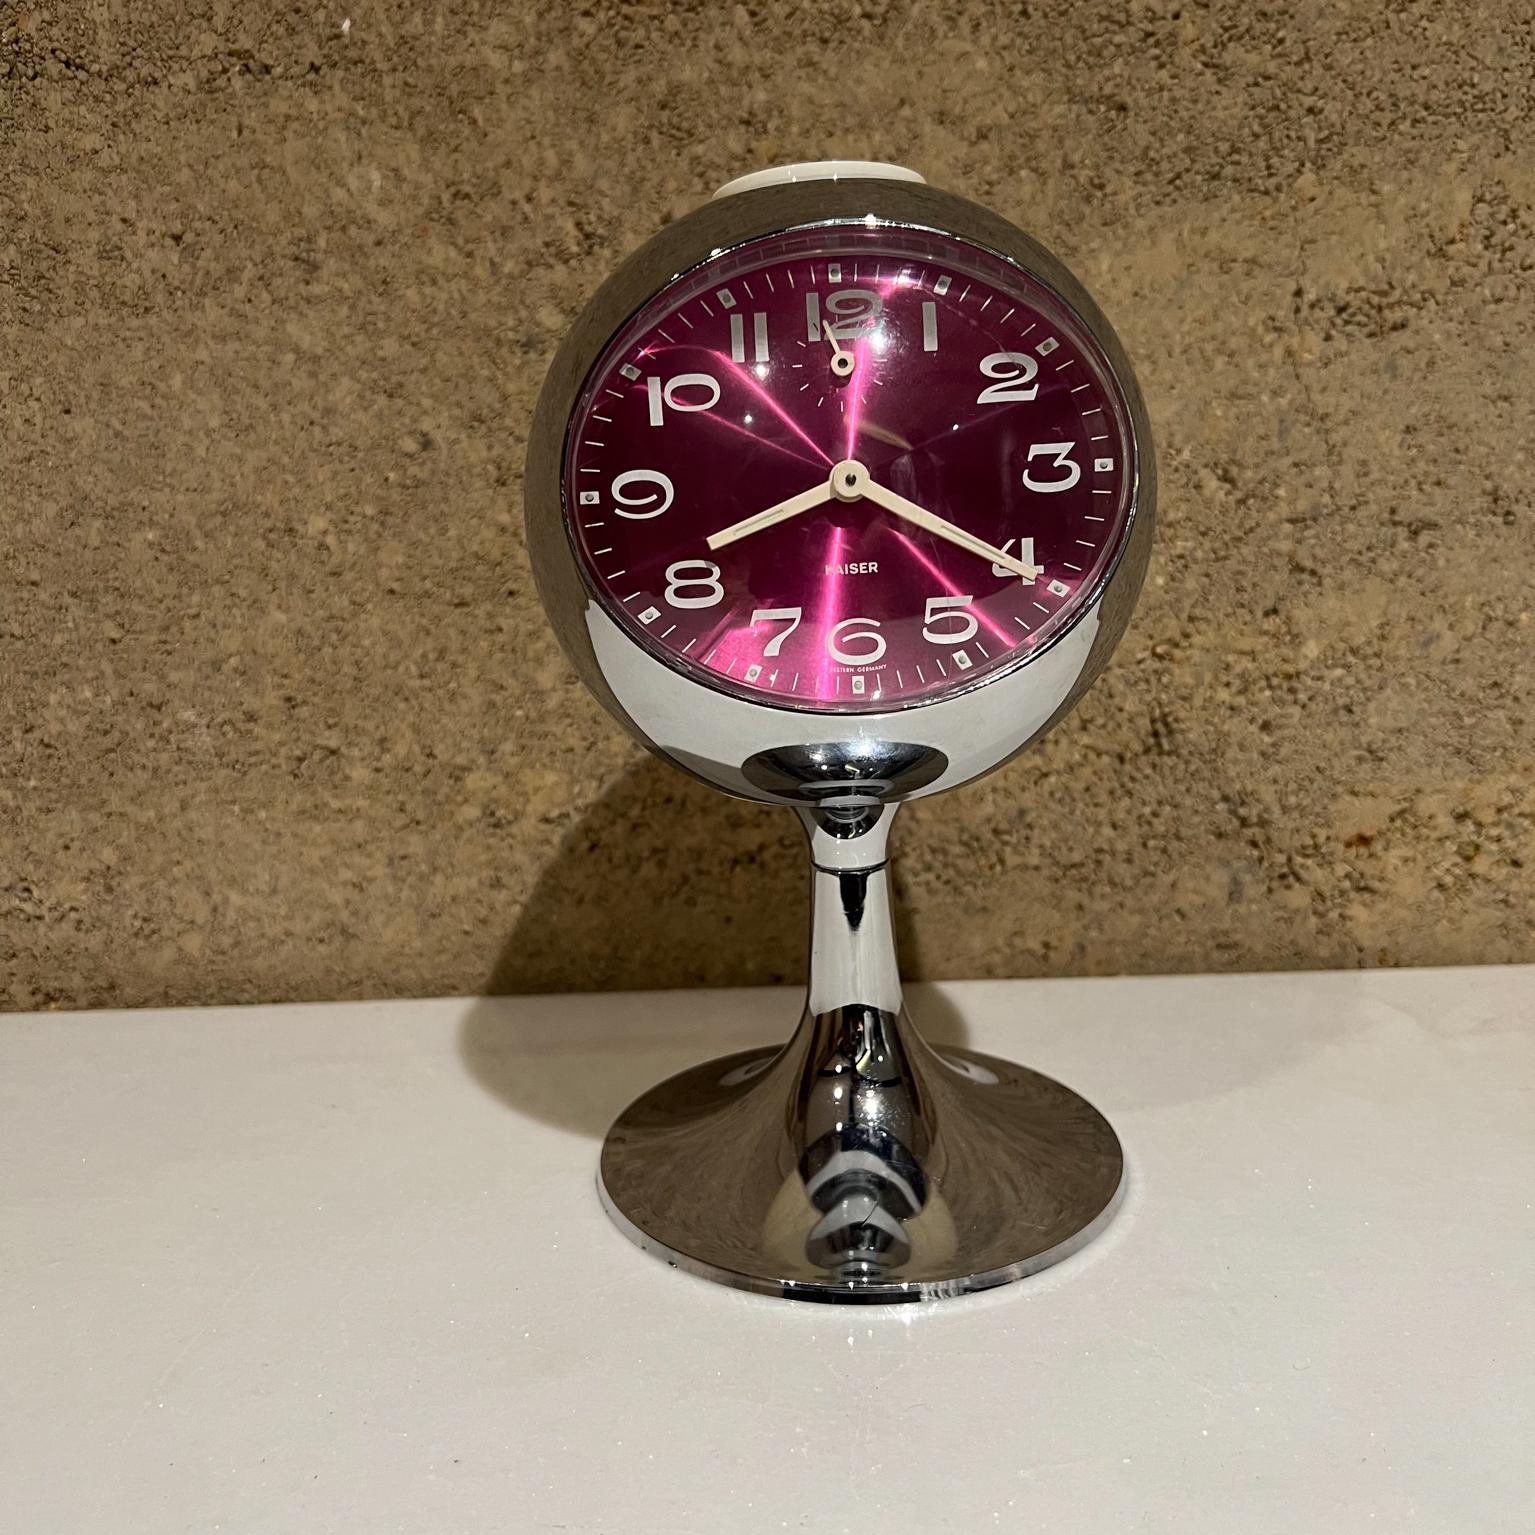 Tulip Space Age table clock made in West Germany by Kaiser.
Chrome and plastic style of Joe Colombo
Bright purple white and silver
8 tall x 4.5 diameter
Original preowned good working condition. Some scratches on plastic. 
Keeps accurate